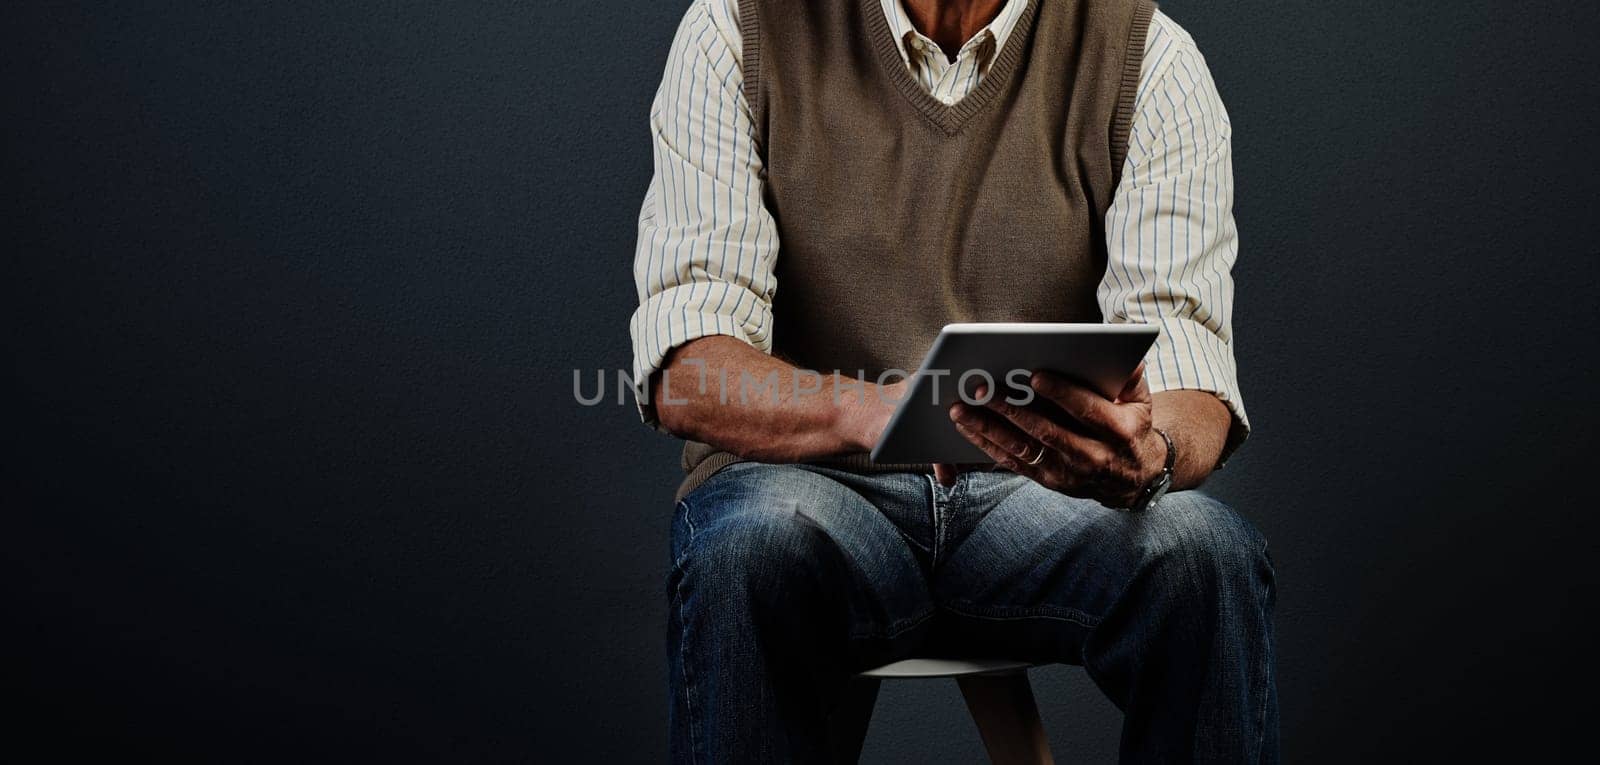 Updating his lifestyle. Studio shot of an unrecognizable man using a tablet while sitting on a wooden stool against a dark background. by YuriArcurs